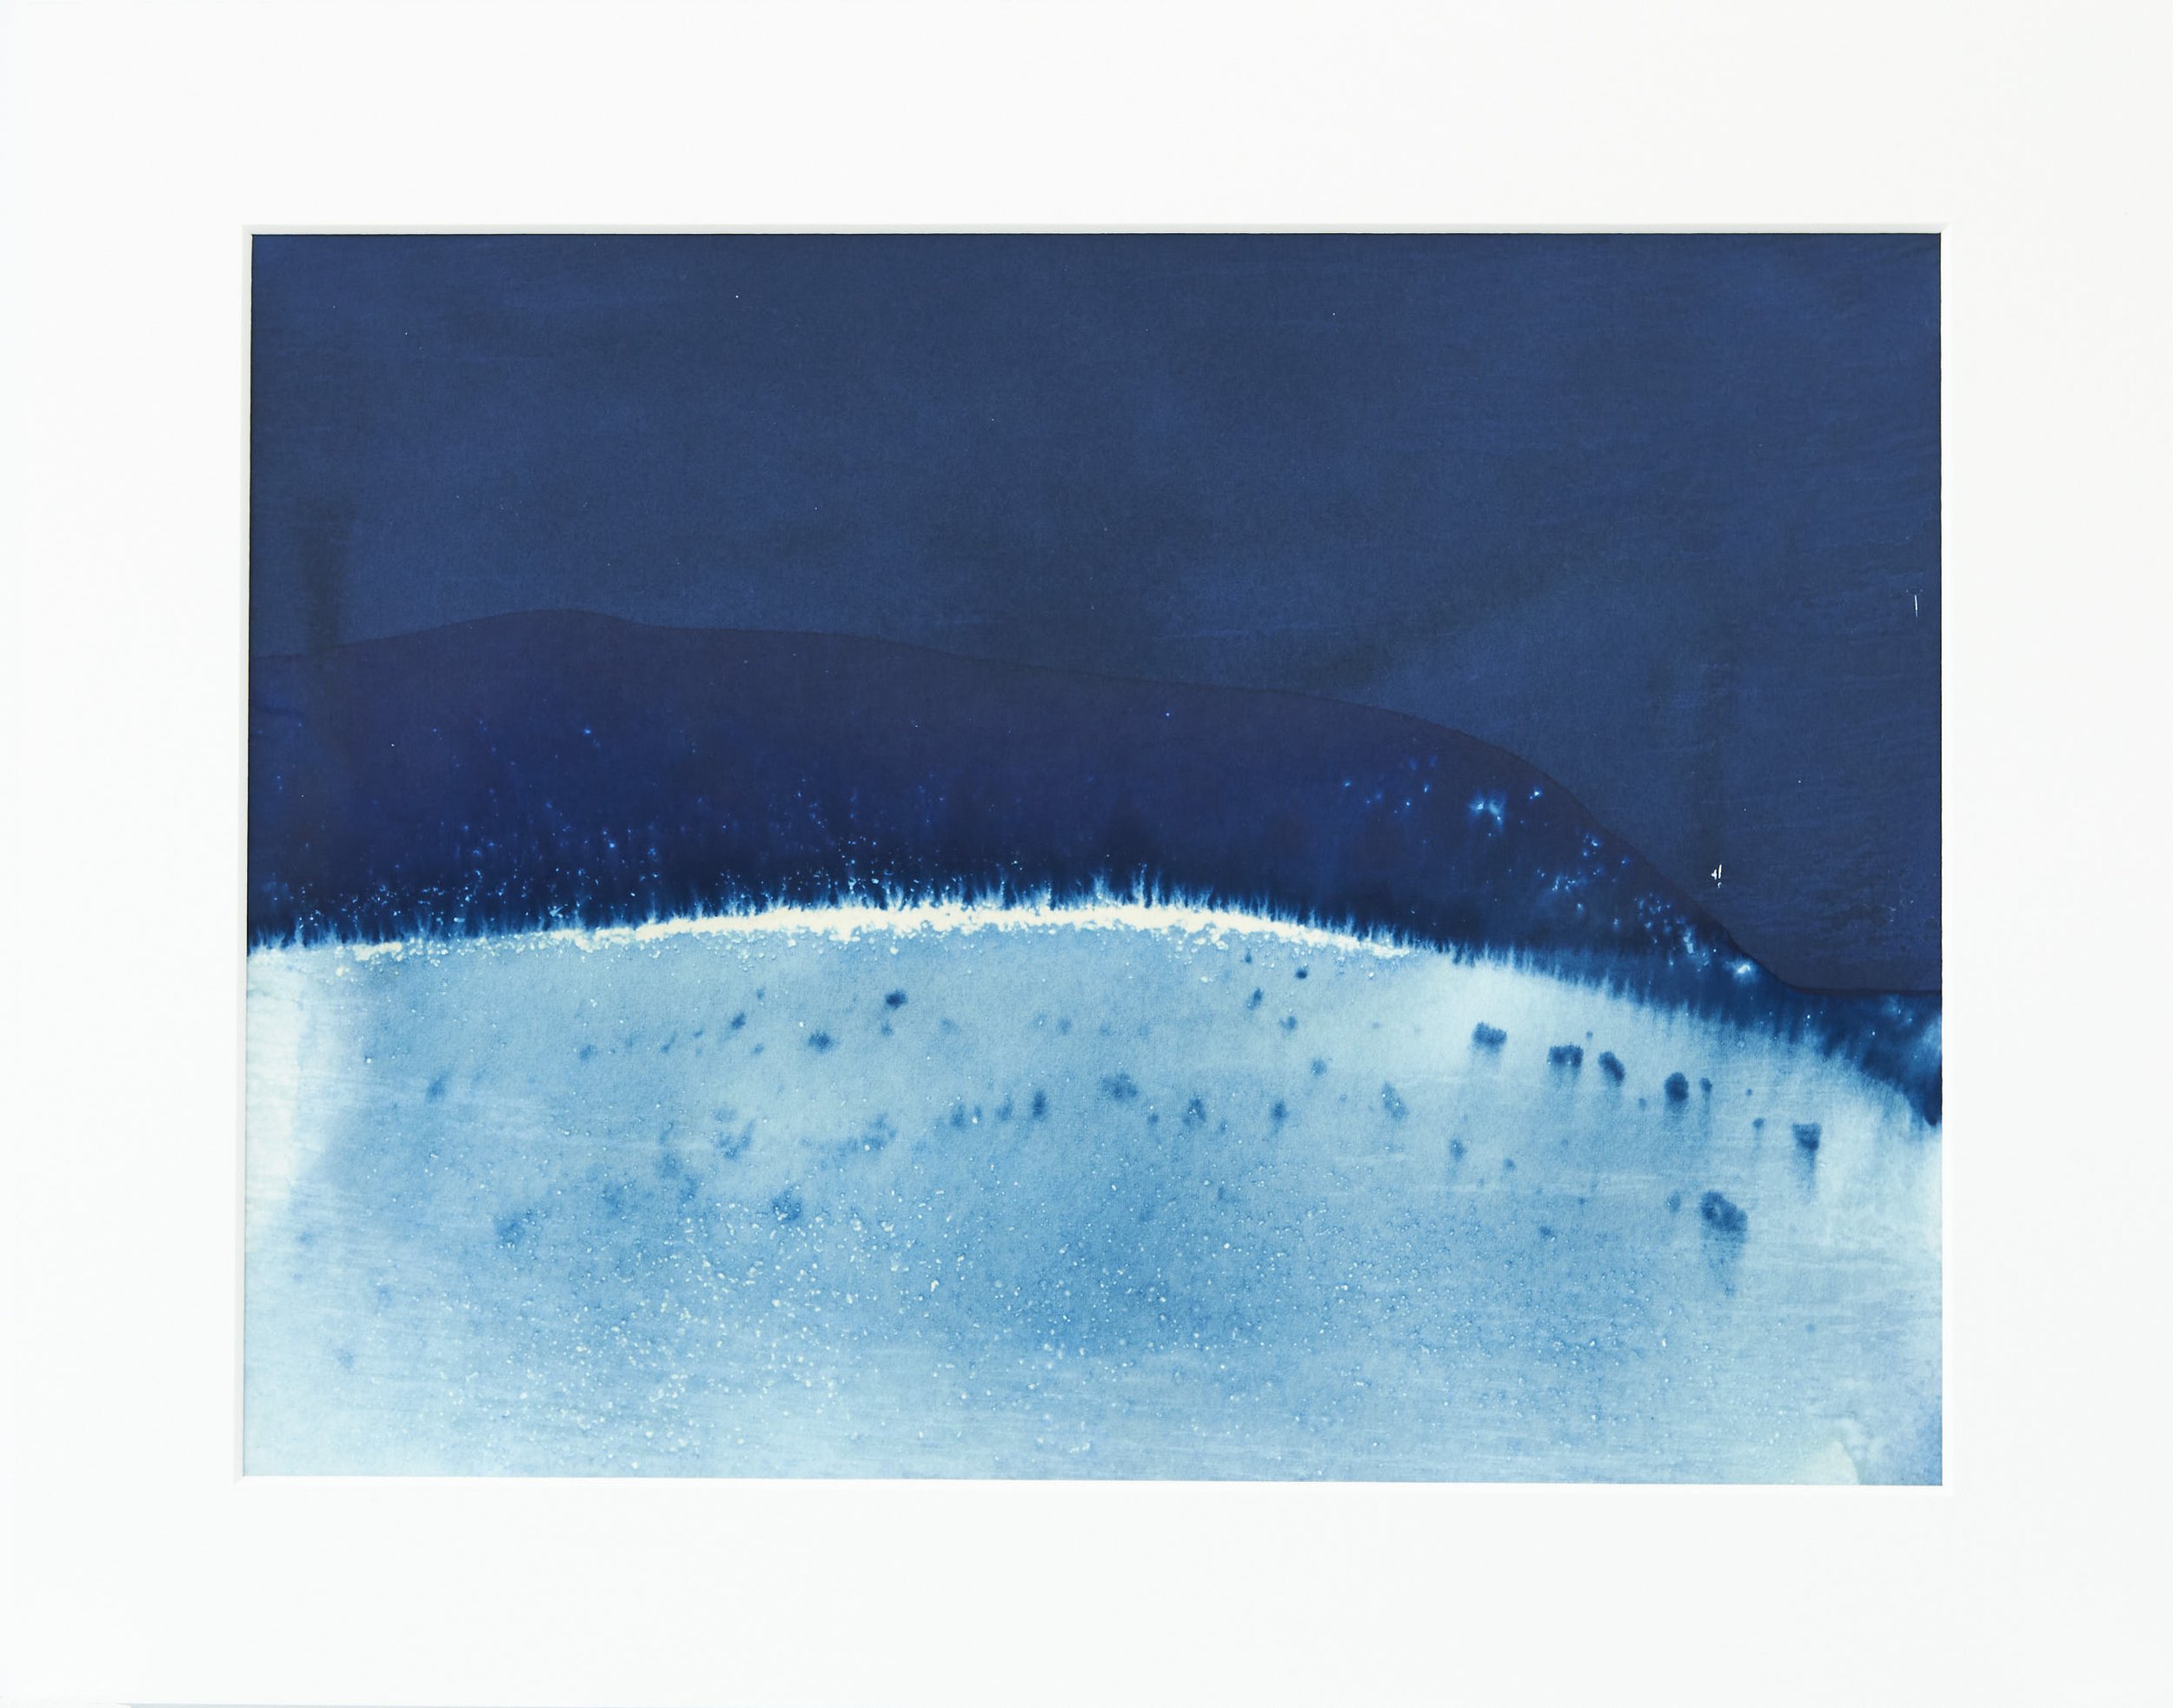  IL-Halford-2021-018 Cyanotype on paper  Print 9x12in  